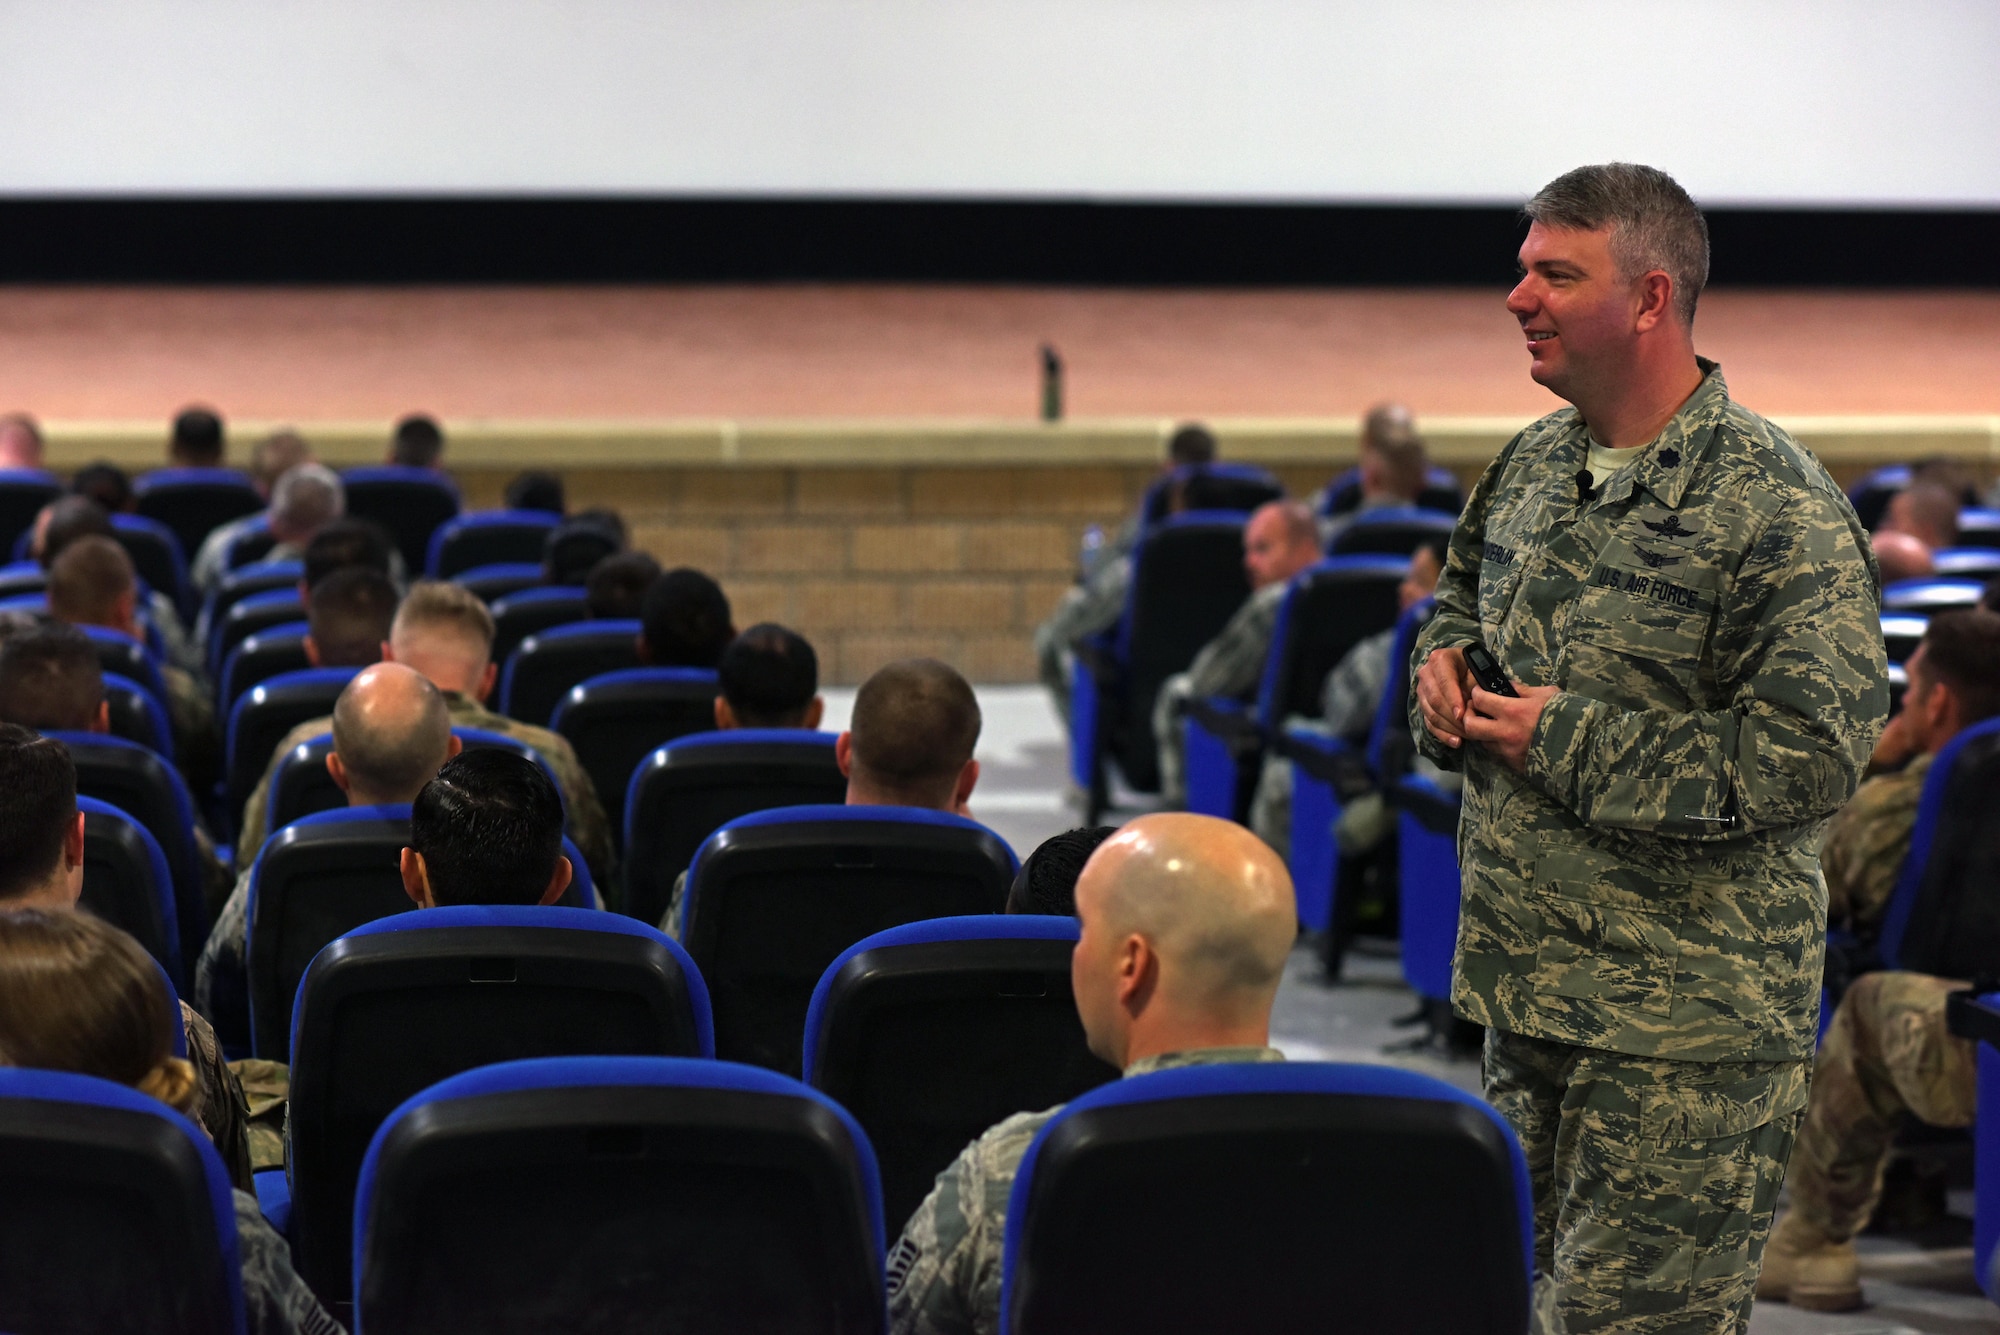 U.S. Air Force Lt. Col. George Sanderlin, senior professionalism instructor for the Profession of Arms Center of Excellence course, speaks to a theater full of Airmen at Al Udeid Air Base, Qatar, Feb. 10, 2017. The Airmen attended the first PACE course taught in the U.S. Central Command area of responsibility. (U.S. Air Force photo by Senior Airman Cynthia A. Innocenti)